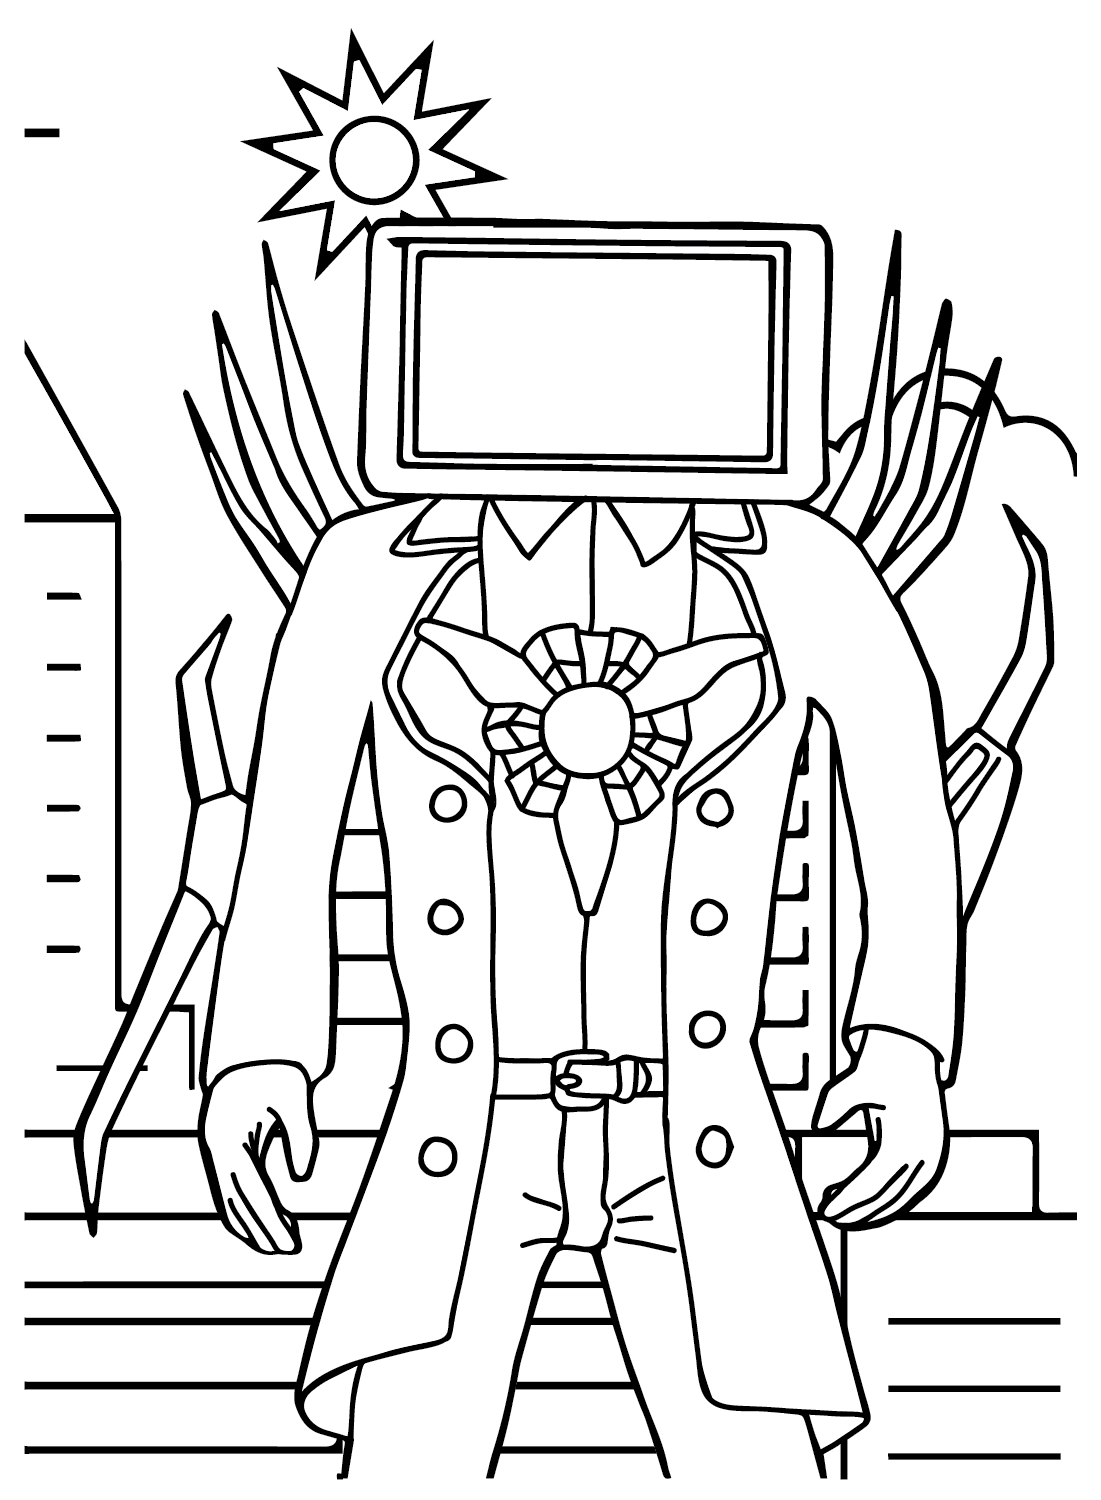 Titan TV Man Coloring Sheet for Kids - Free Printable Coloring Pages